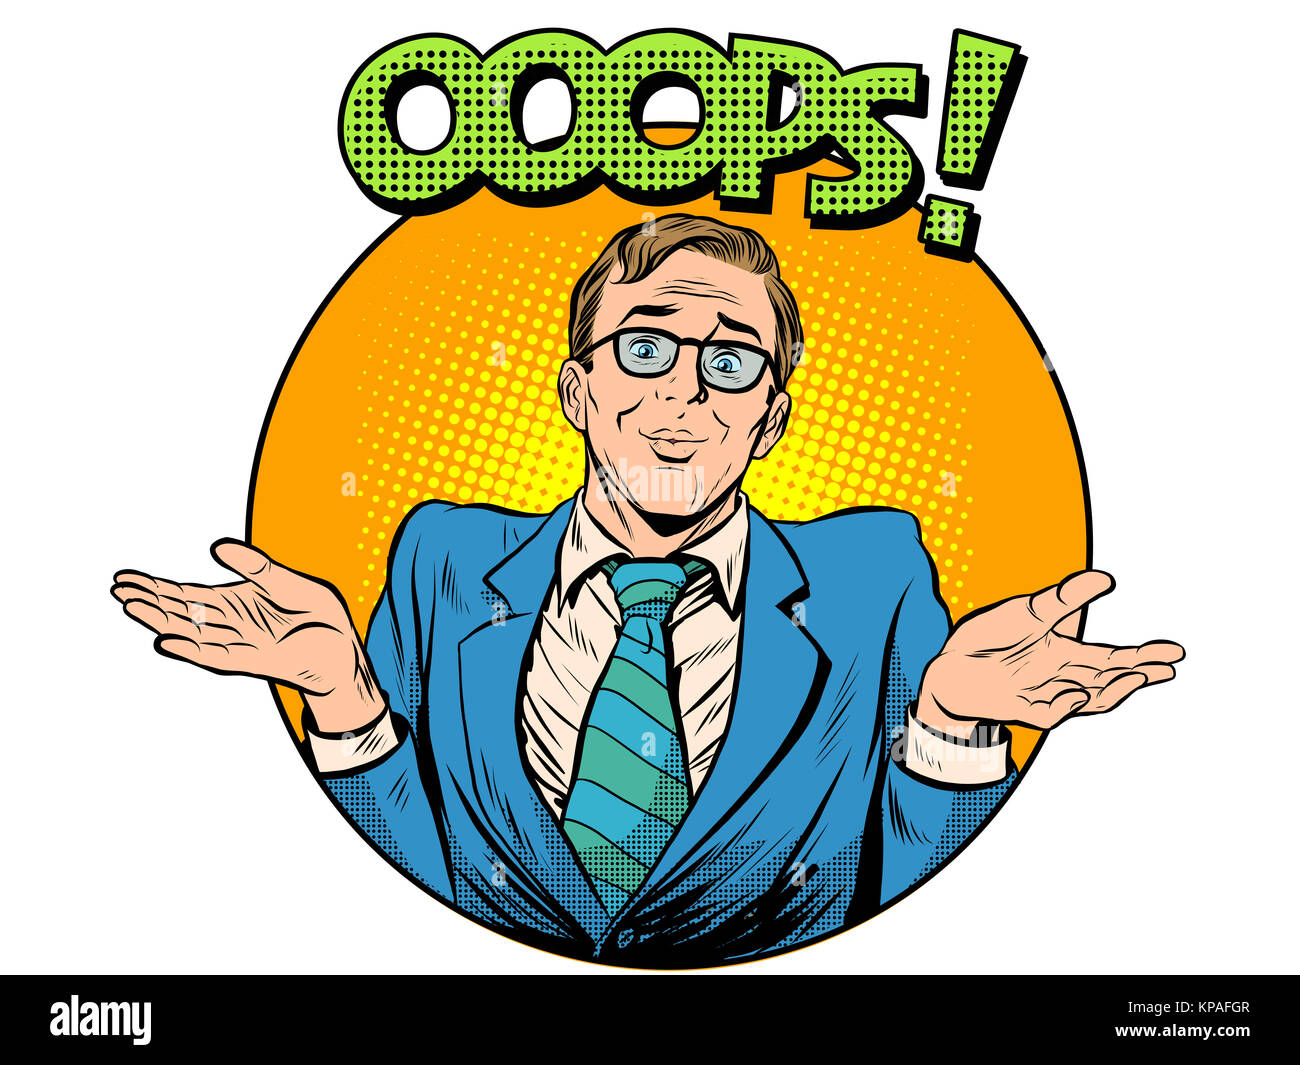 oops problem man business concept Stock Photo